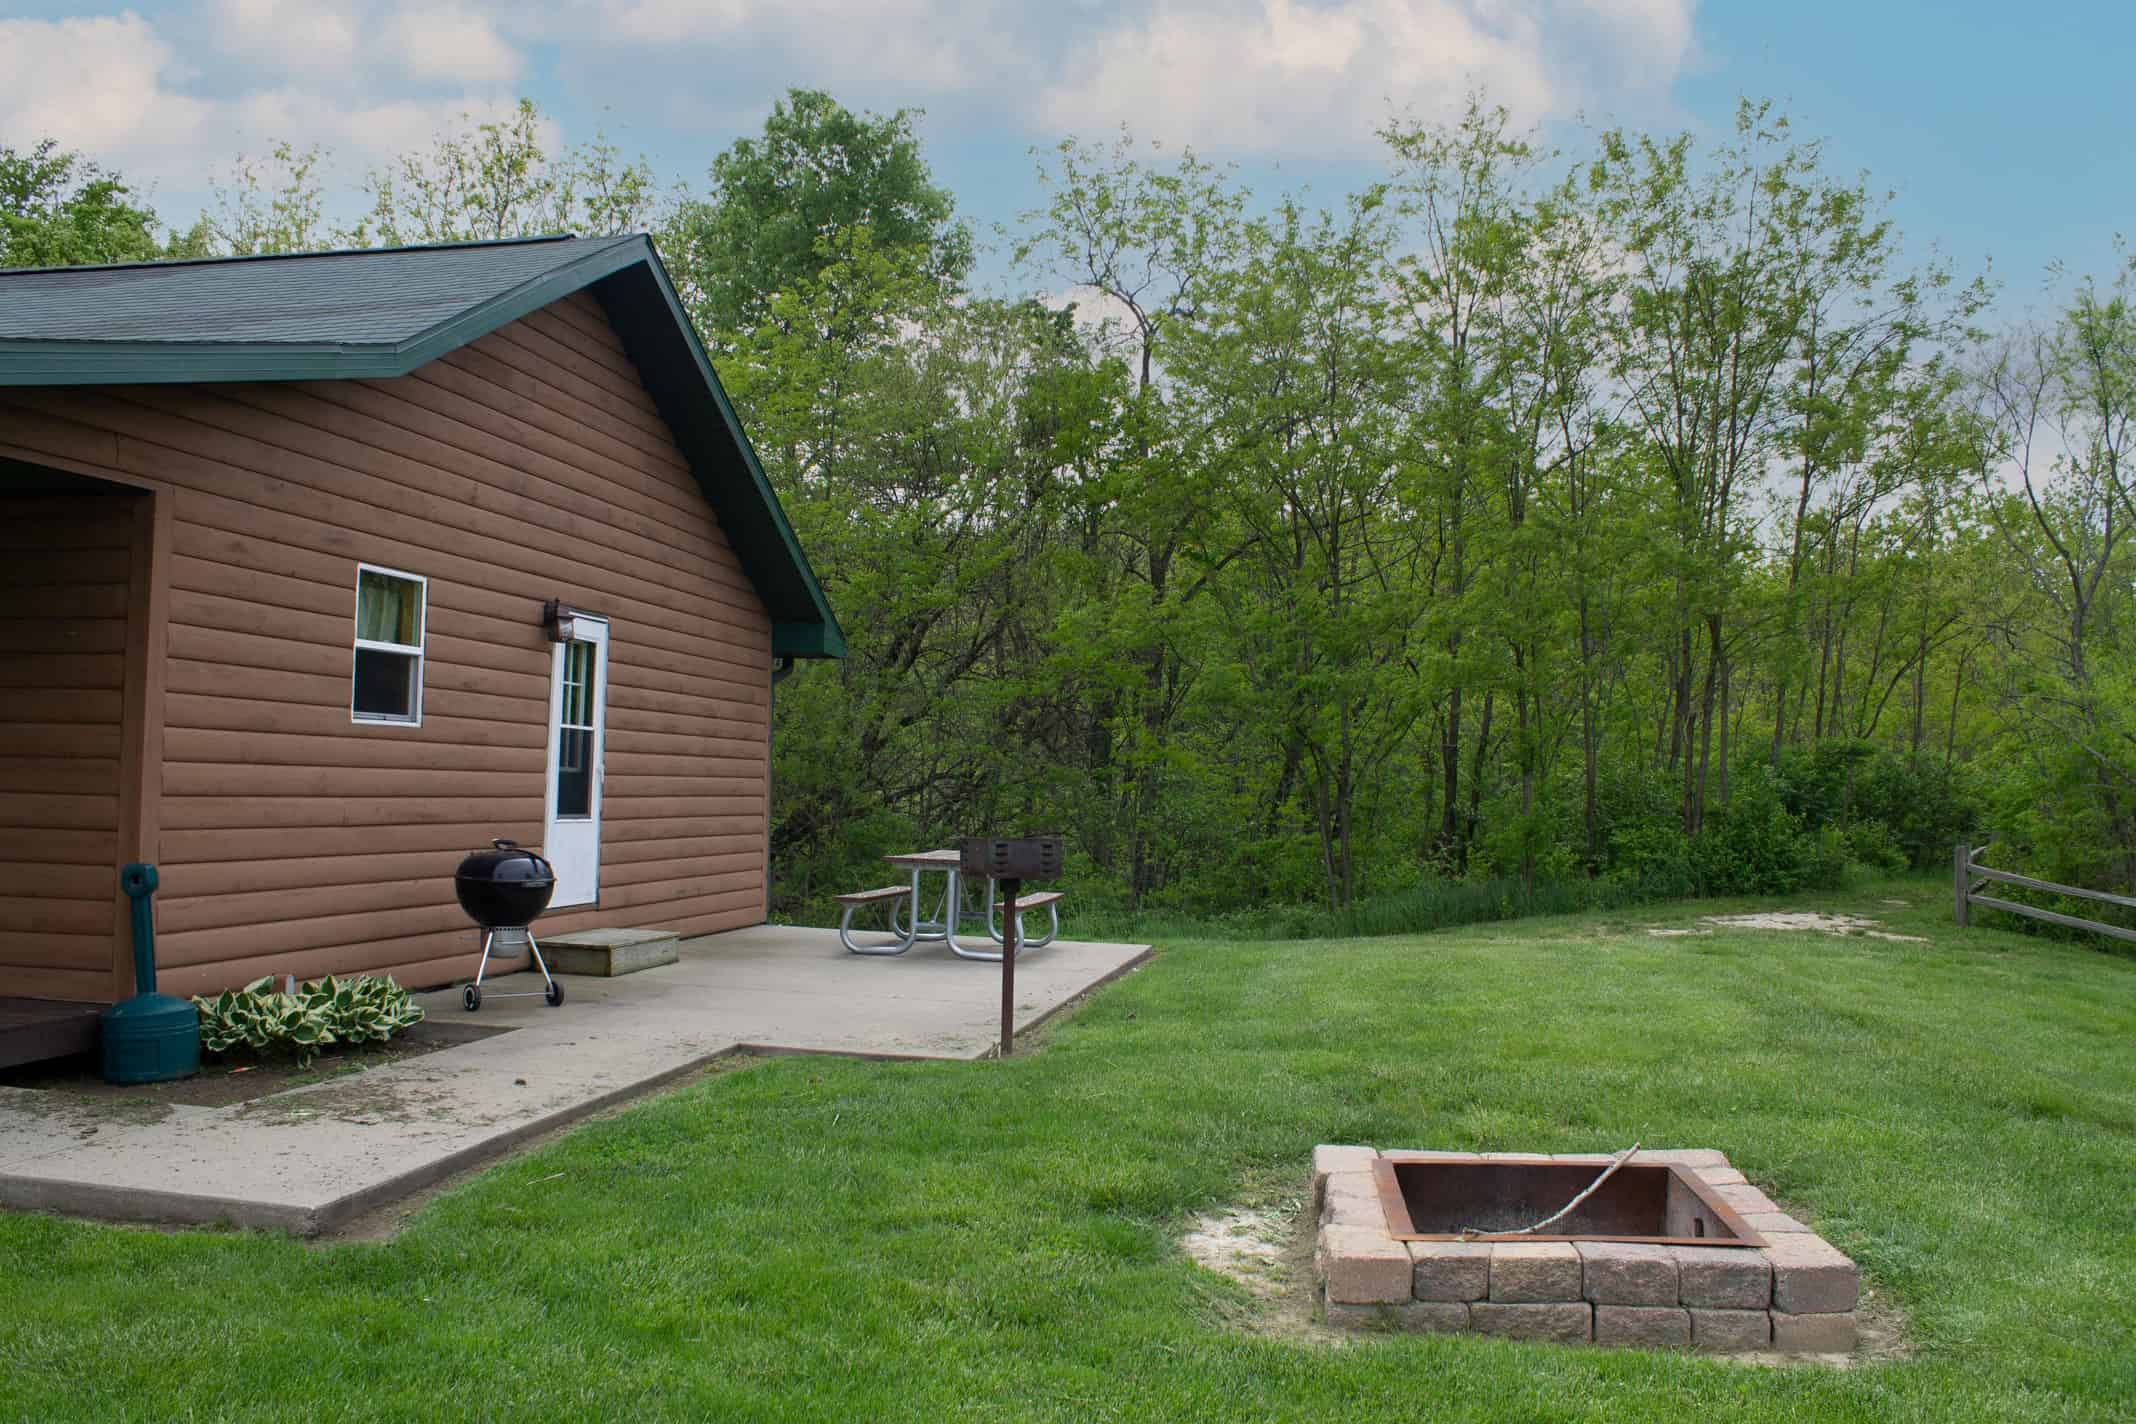 three bedroom cabins in shelbyville illinois